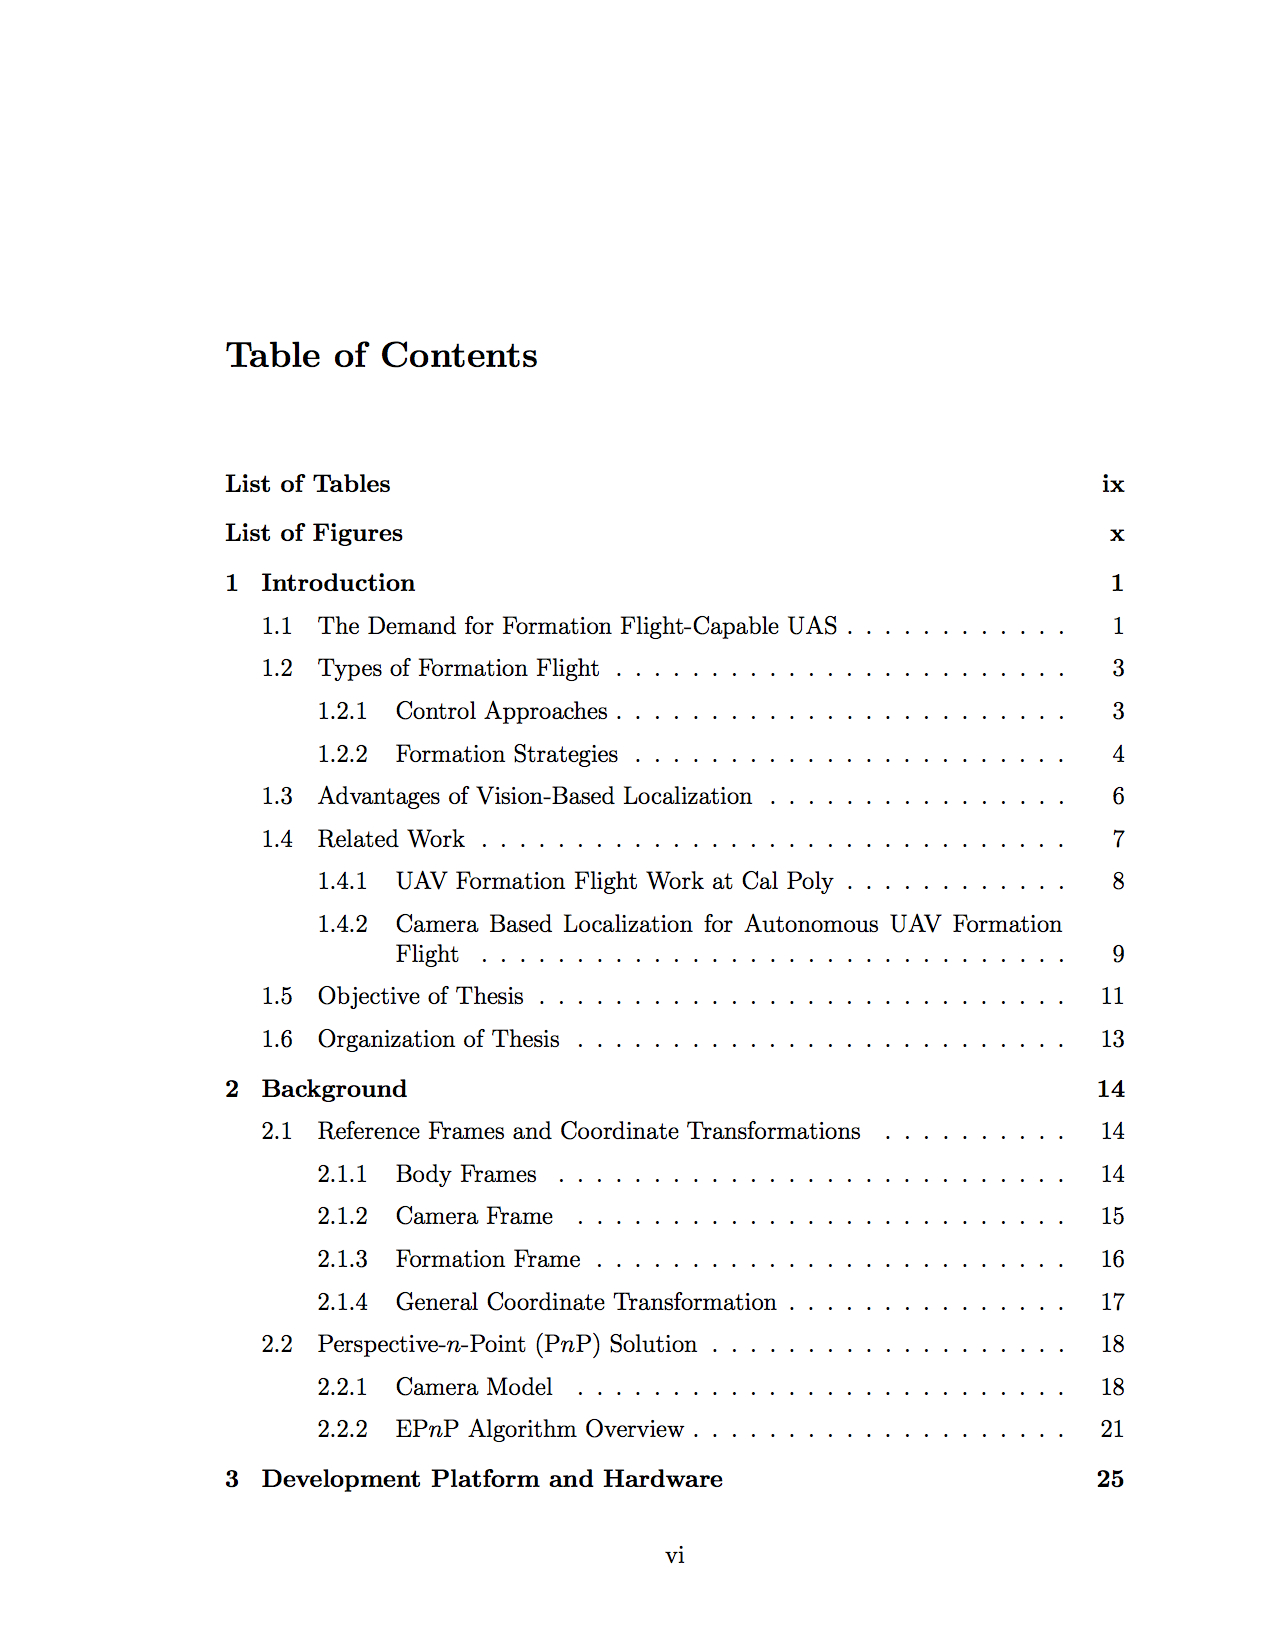 011 Table Of Contents Template Dmkb0 Stunning Ideas Google Pertaining To Word 2013 Table Of Contents Template